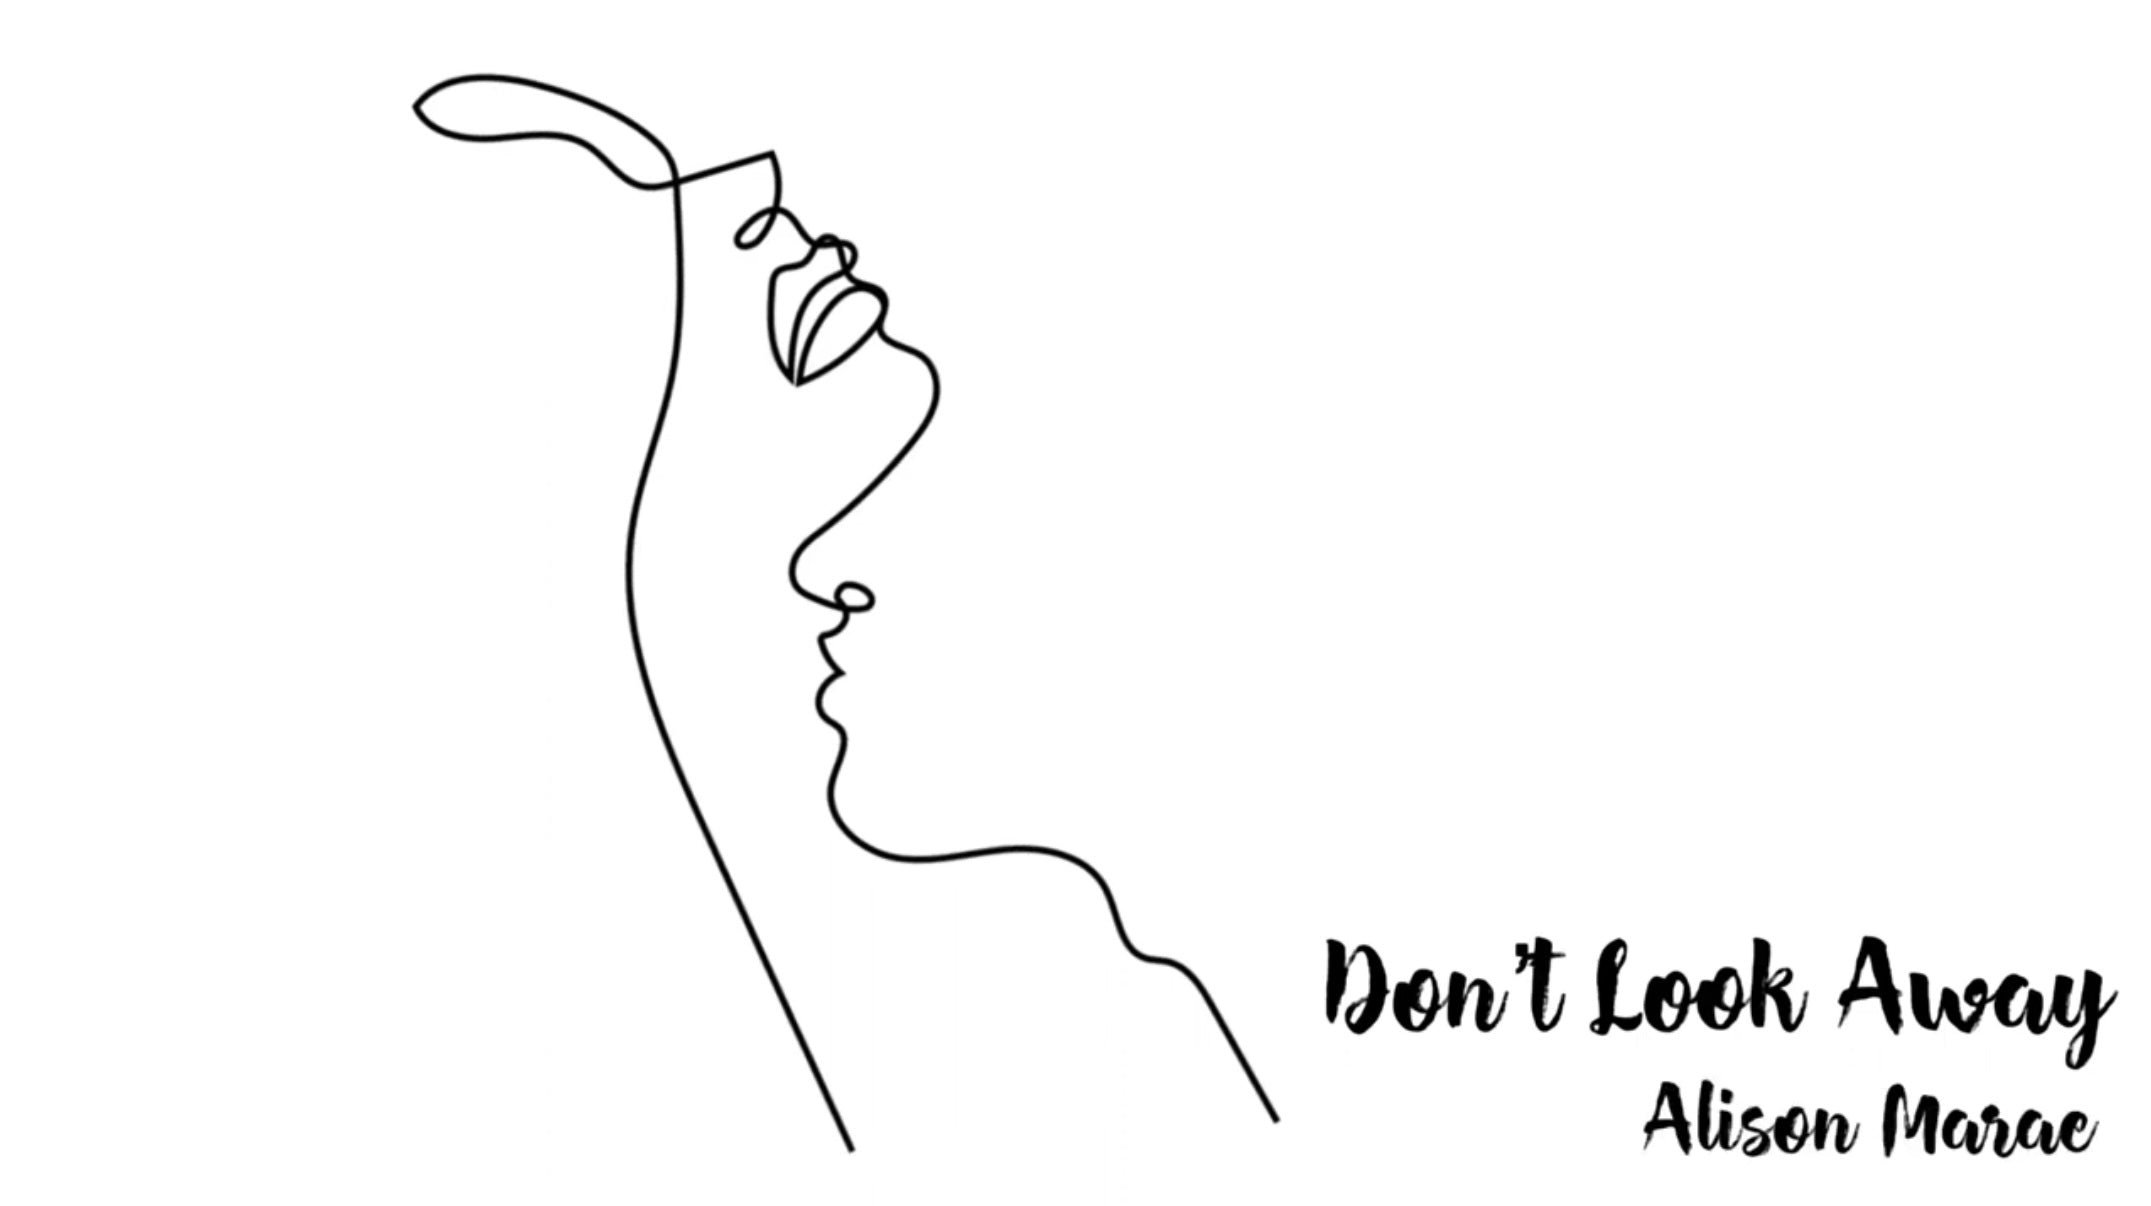 Load video: Don’t Look Away lyric video by Alison Marae